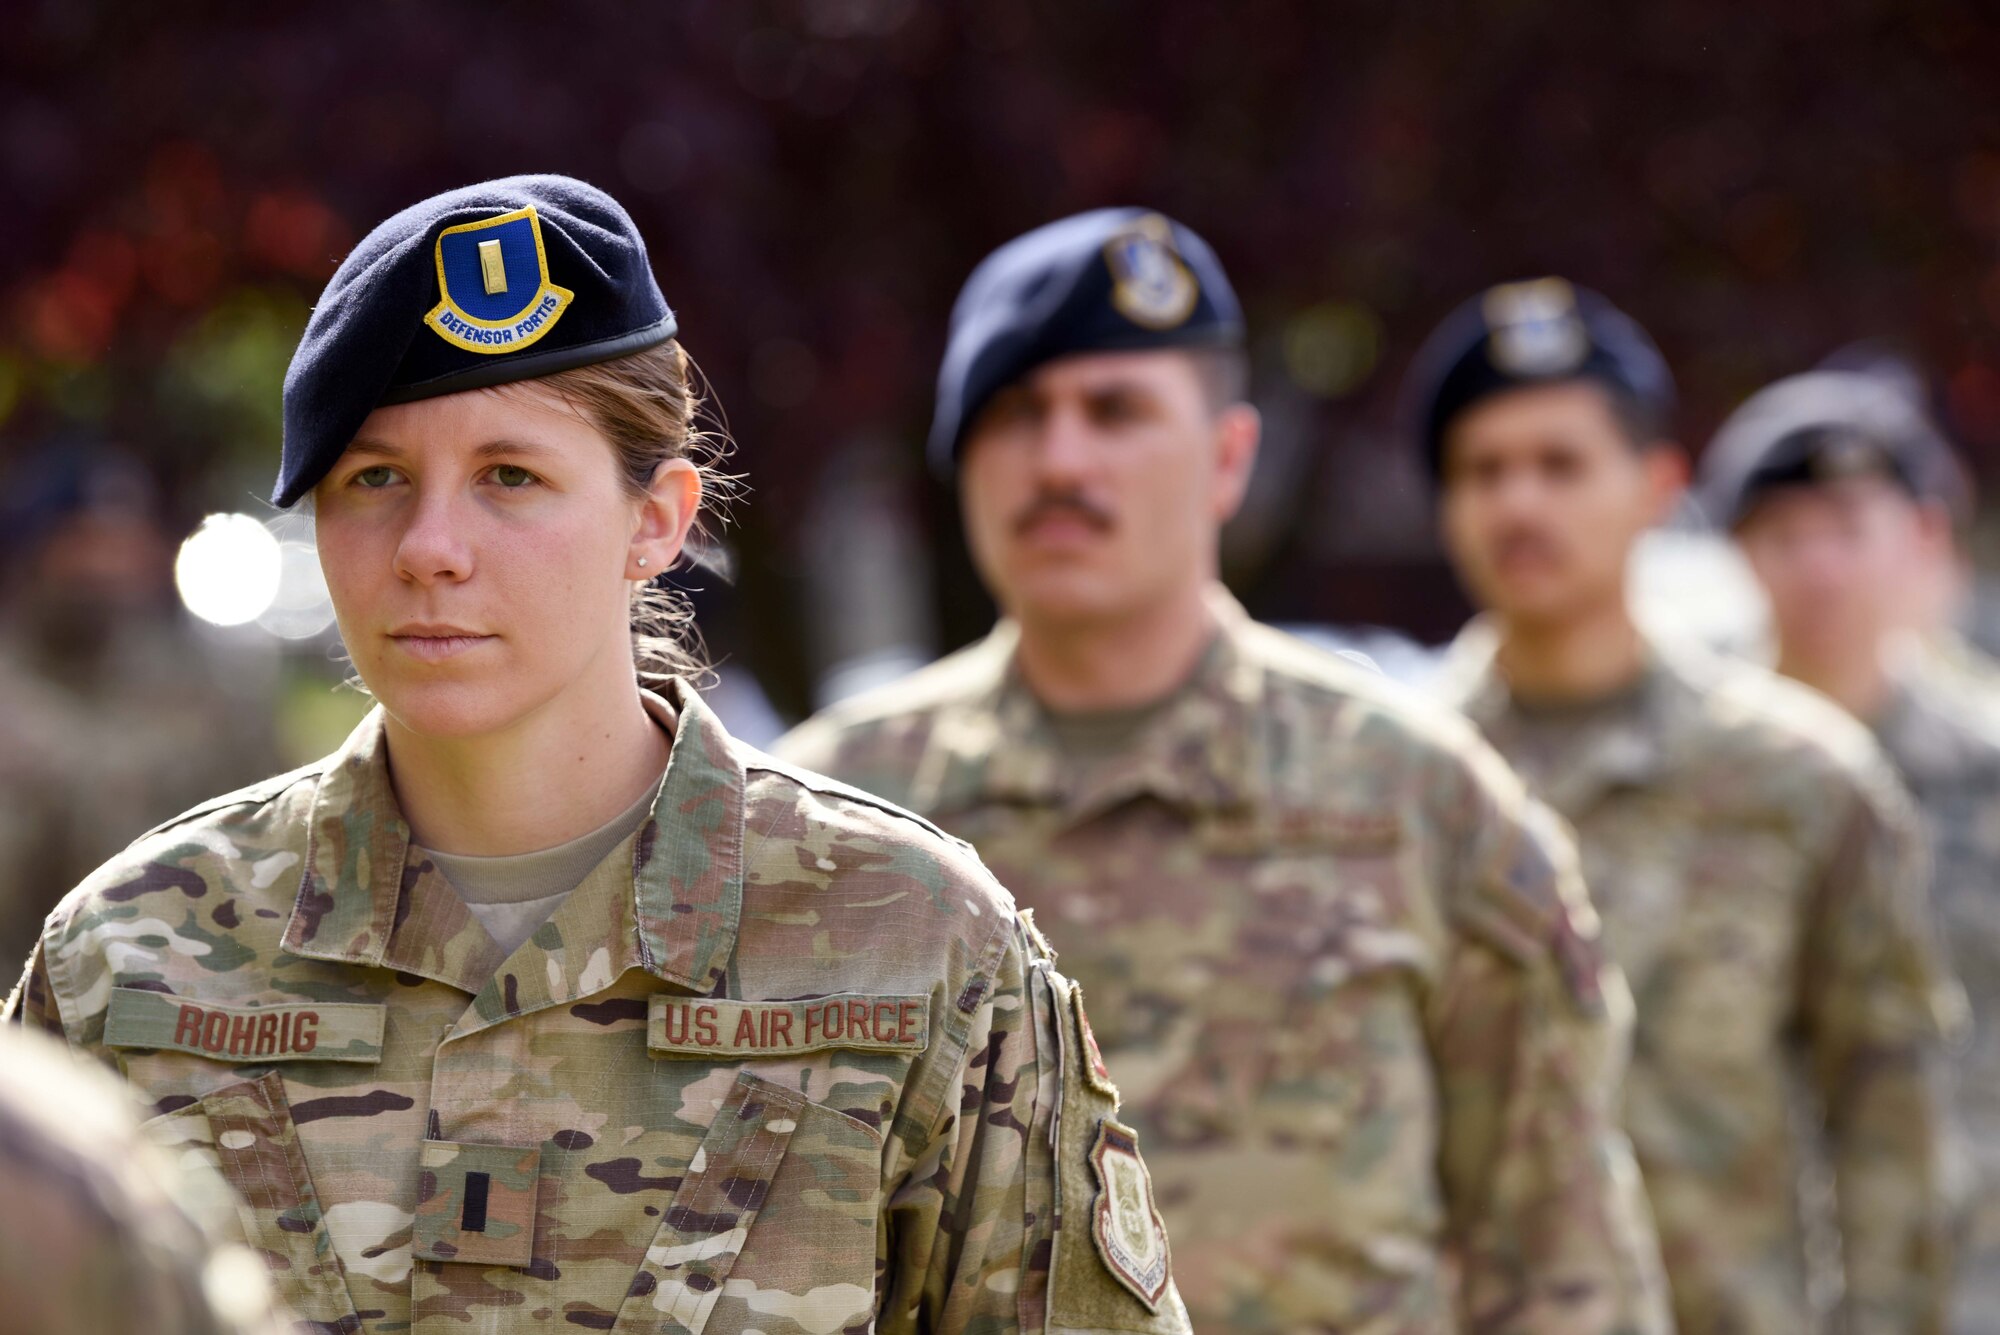 First Lieutenant Jessica Rohrig, 100th Security Forces Squadron operations officer, stands at attention during the 100th SFS Police Week closing ceremony at RAF Mildenhall, England, May 15, 2020. National Police Week is an observance in the United States which pays tribute to local, state and federal officers who’ve died or who’ve been disabled in the line of duty. (U.S. Air Force photo by Senior Airman Brandon Esau)